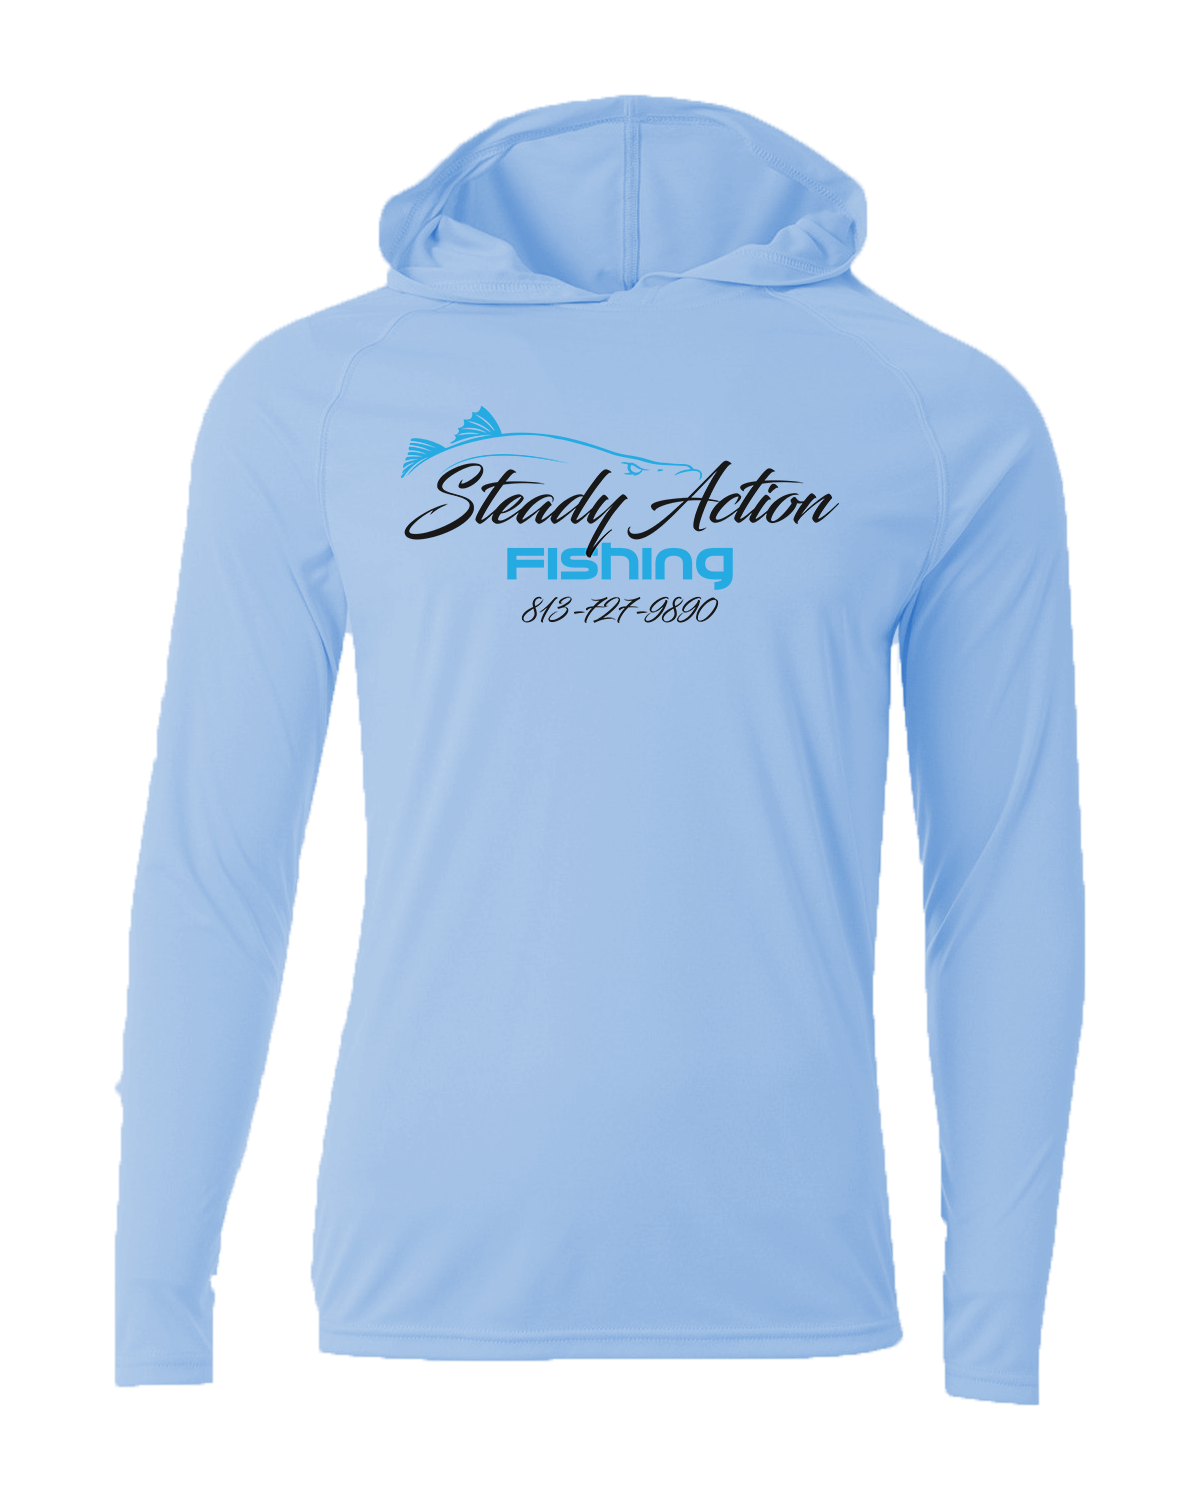 Performance Hooded Shirt  Steady Action Fishing Charters